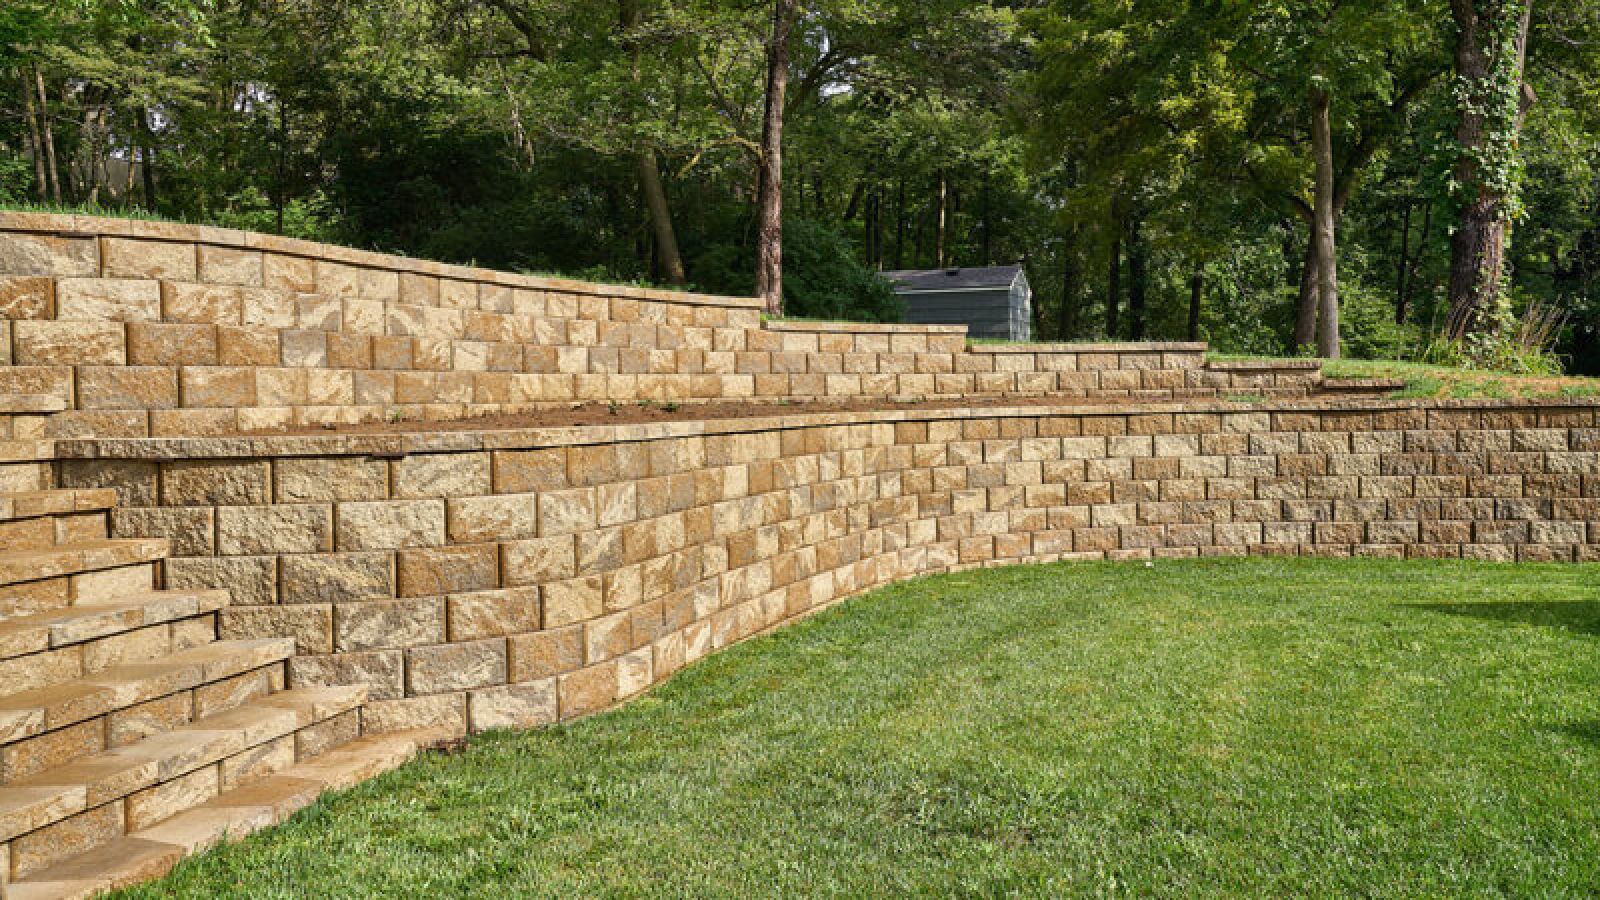 Regal Stone® Retaining Wall blocks by Keystone Hardscapes, symbolizing artistry, displayed at AR Stoneworks & Outdoor Living.